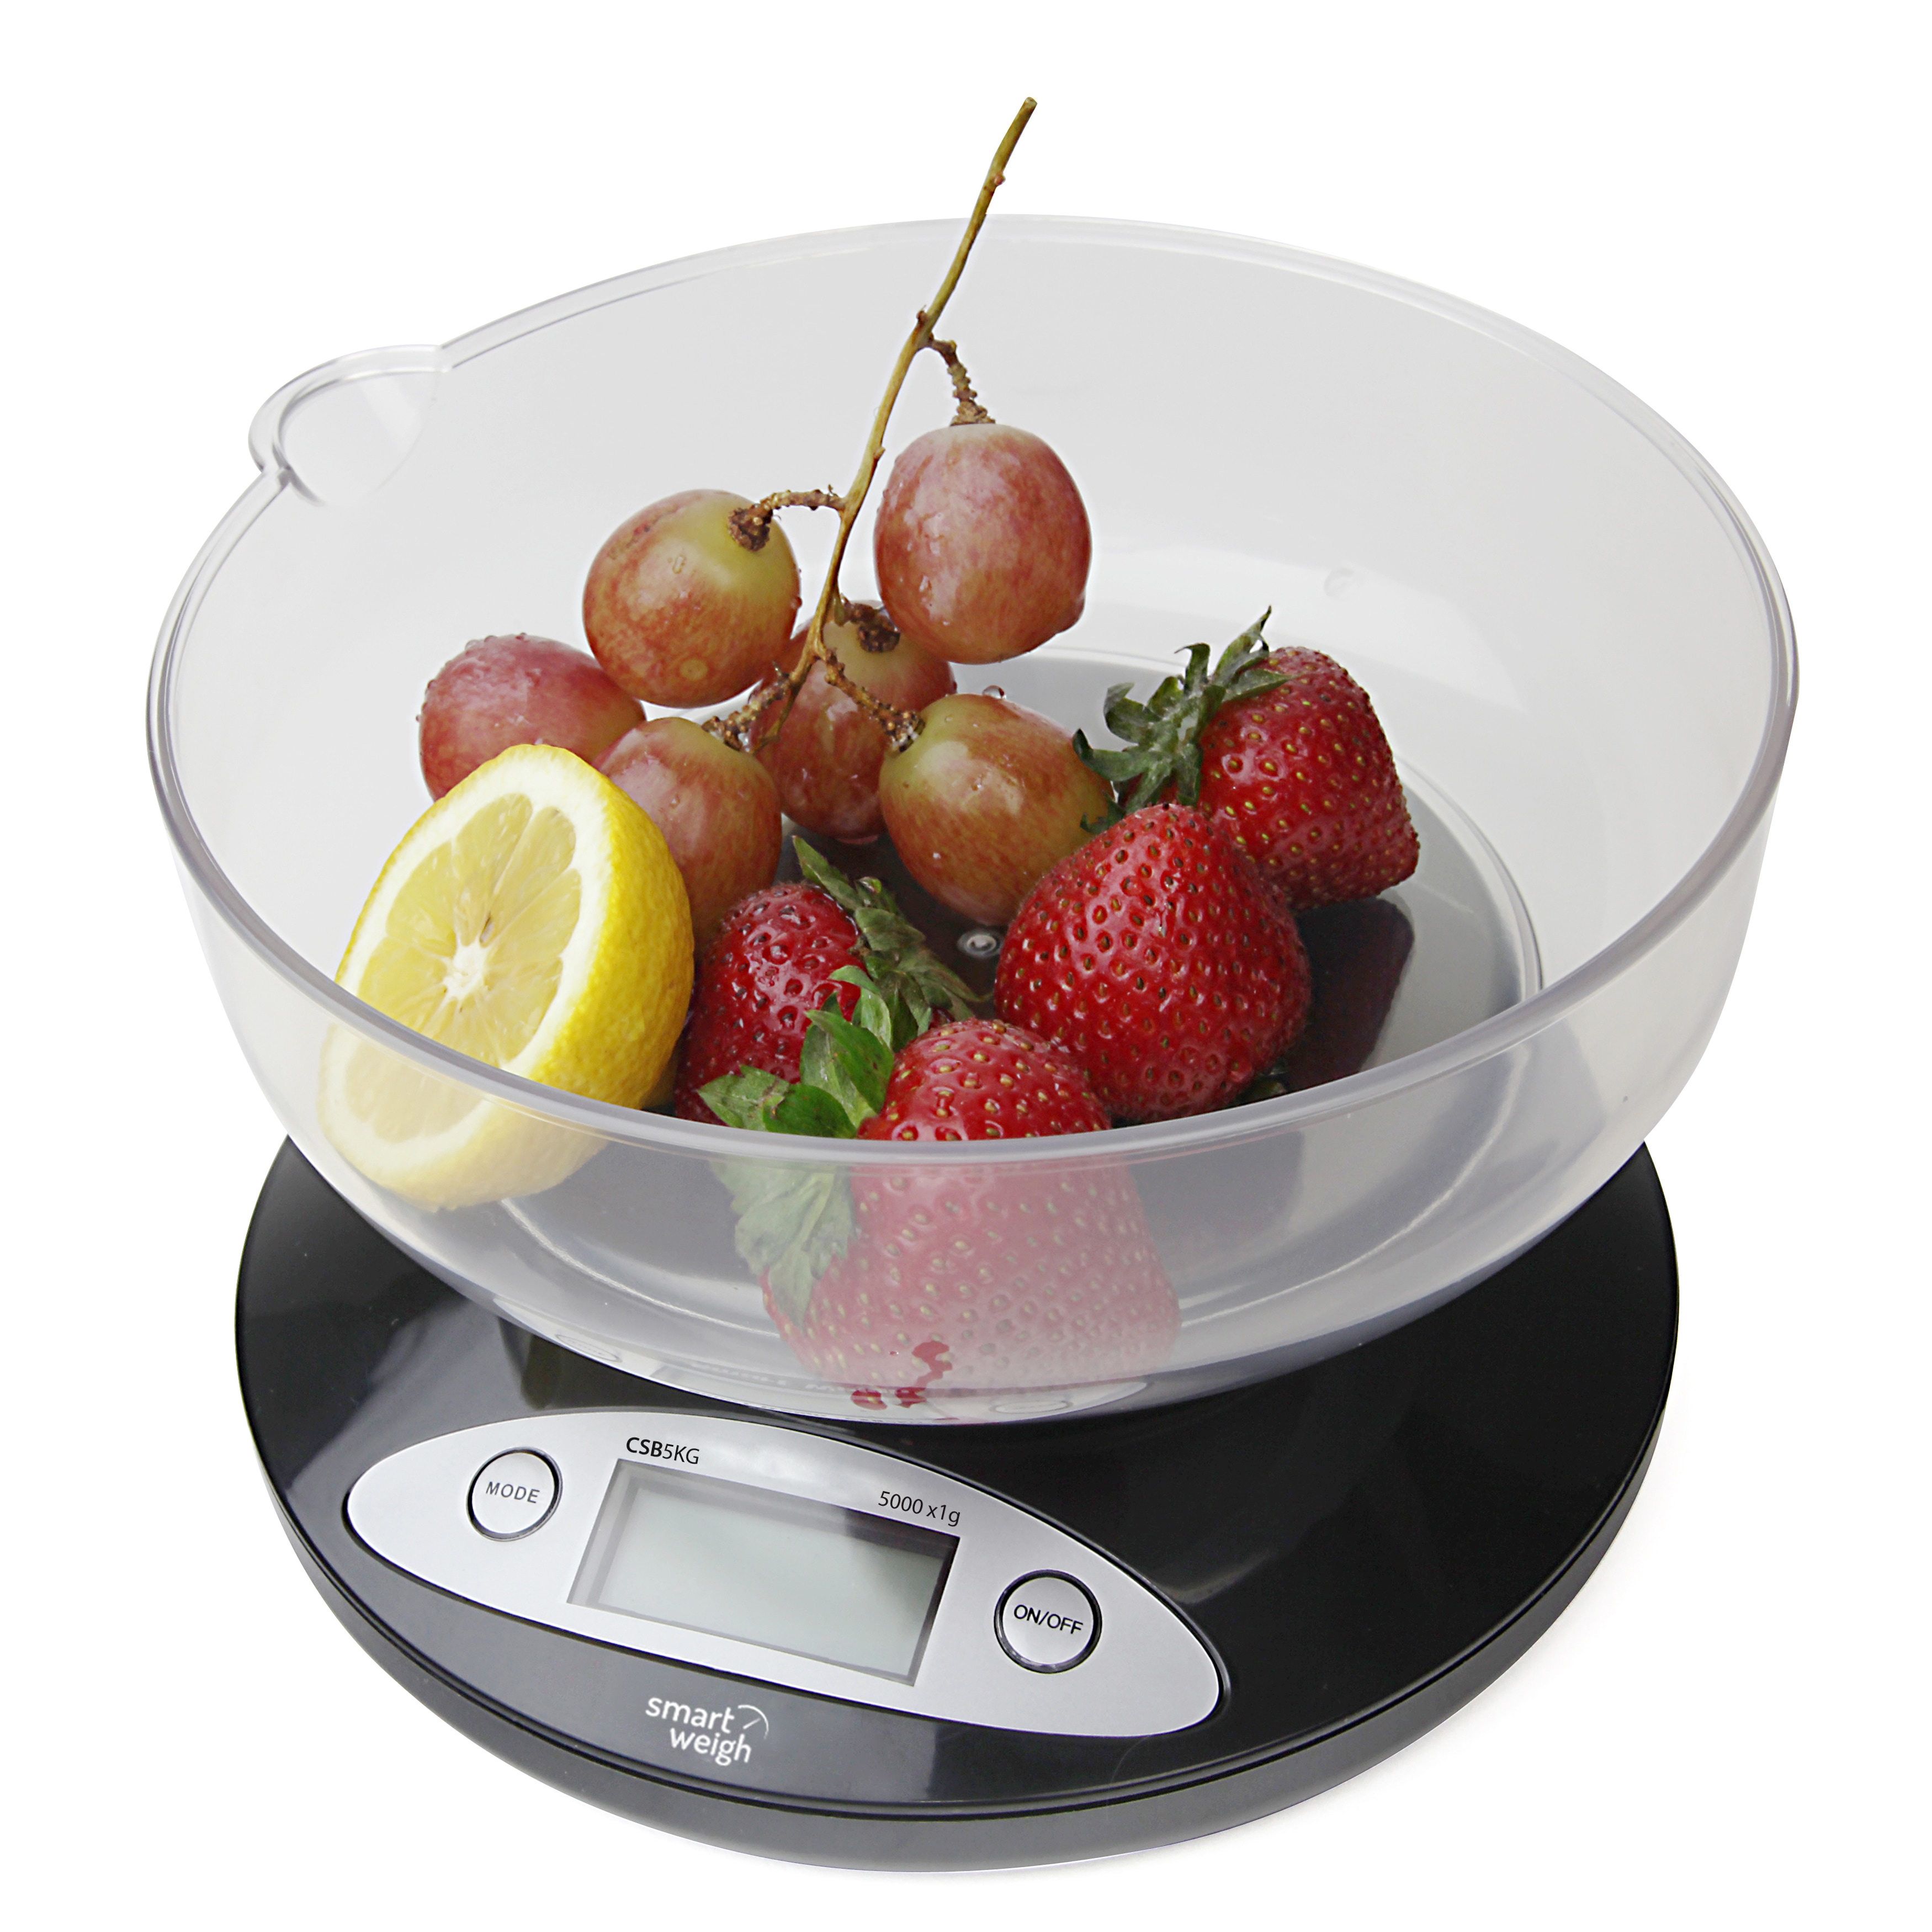 https://ak1.ostkcdn.com/images/products/9681592/Smart-Weigh-CSB5KG-Digital-Multifunction-Kitchen-and-Food-Scale-7dcdc11c-0c94-47df-af19-7b896133ab18.jpg